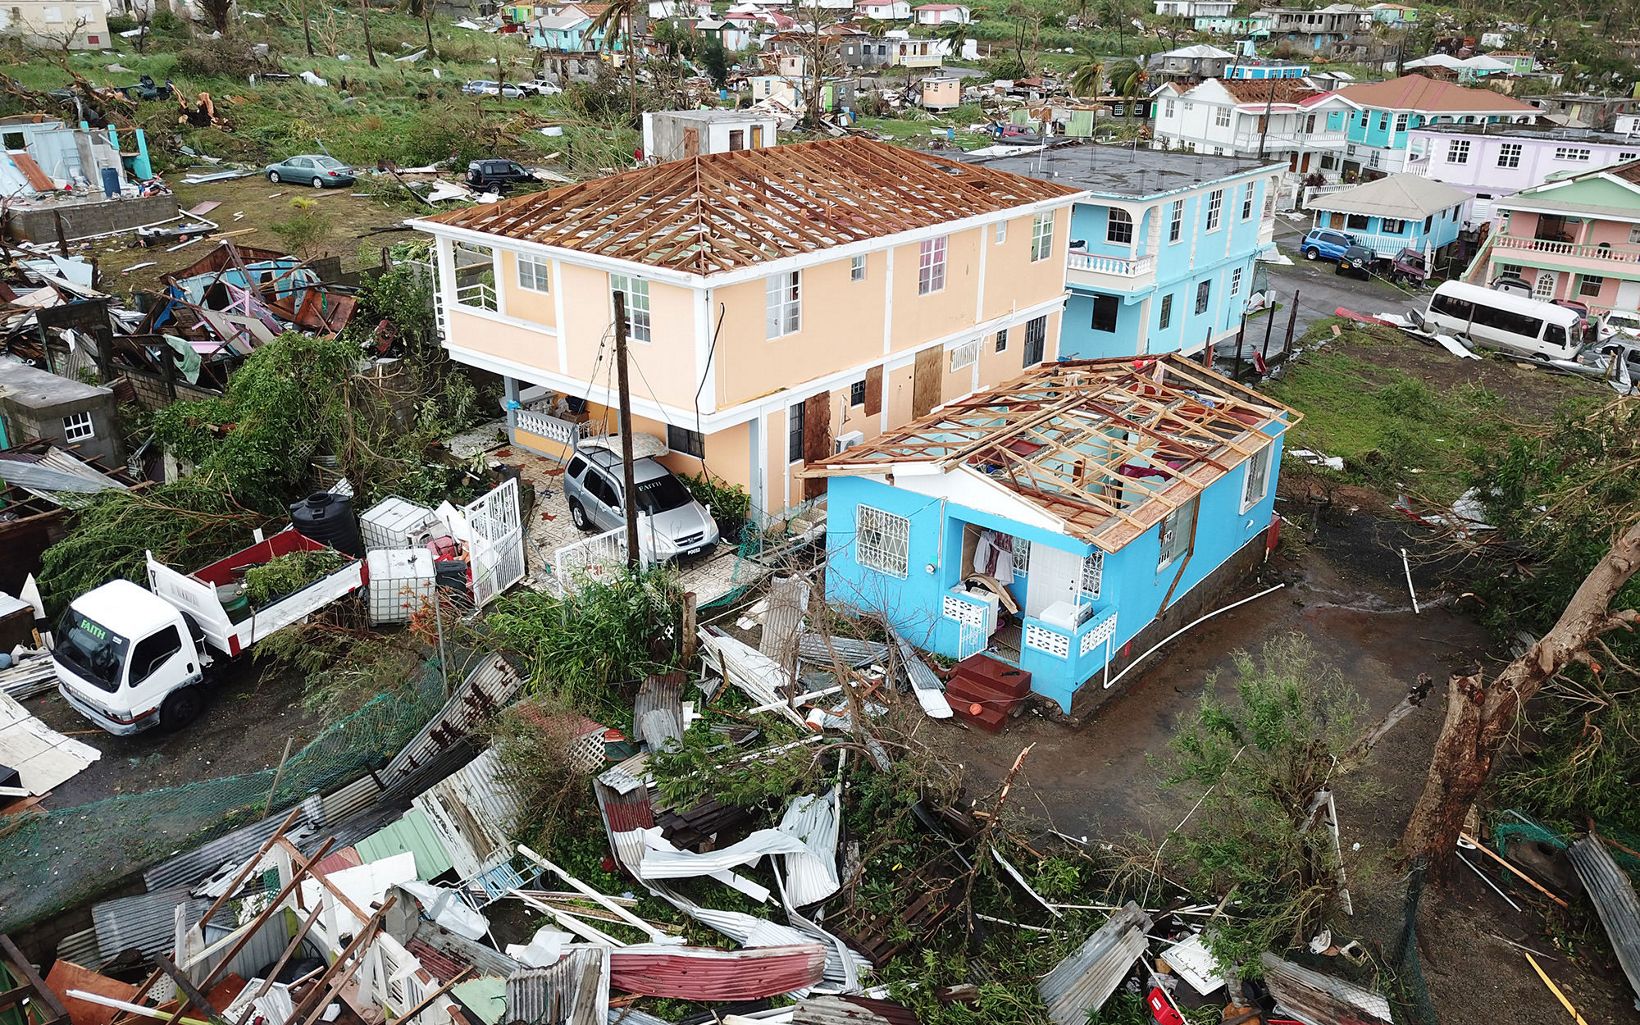 Houses missing roofs in Dominica after Hurricane Maria